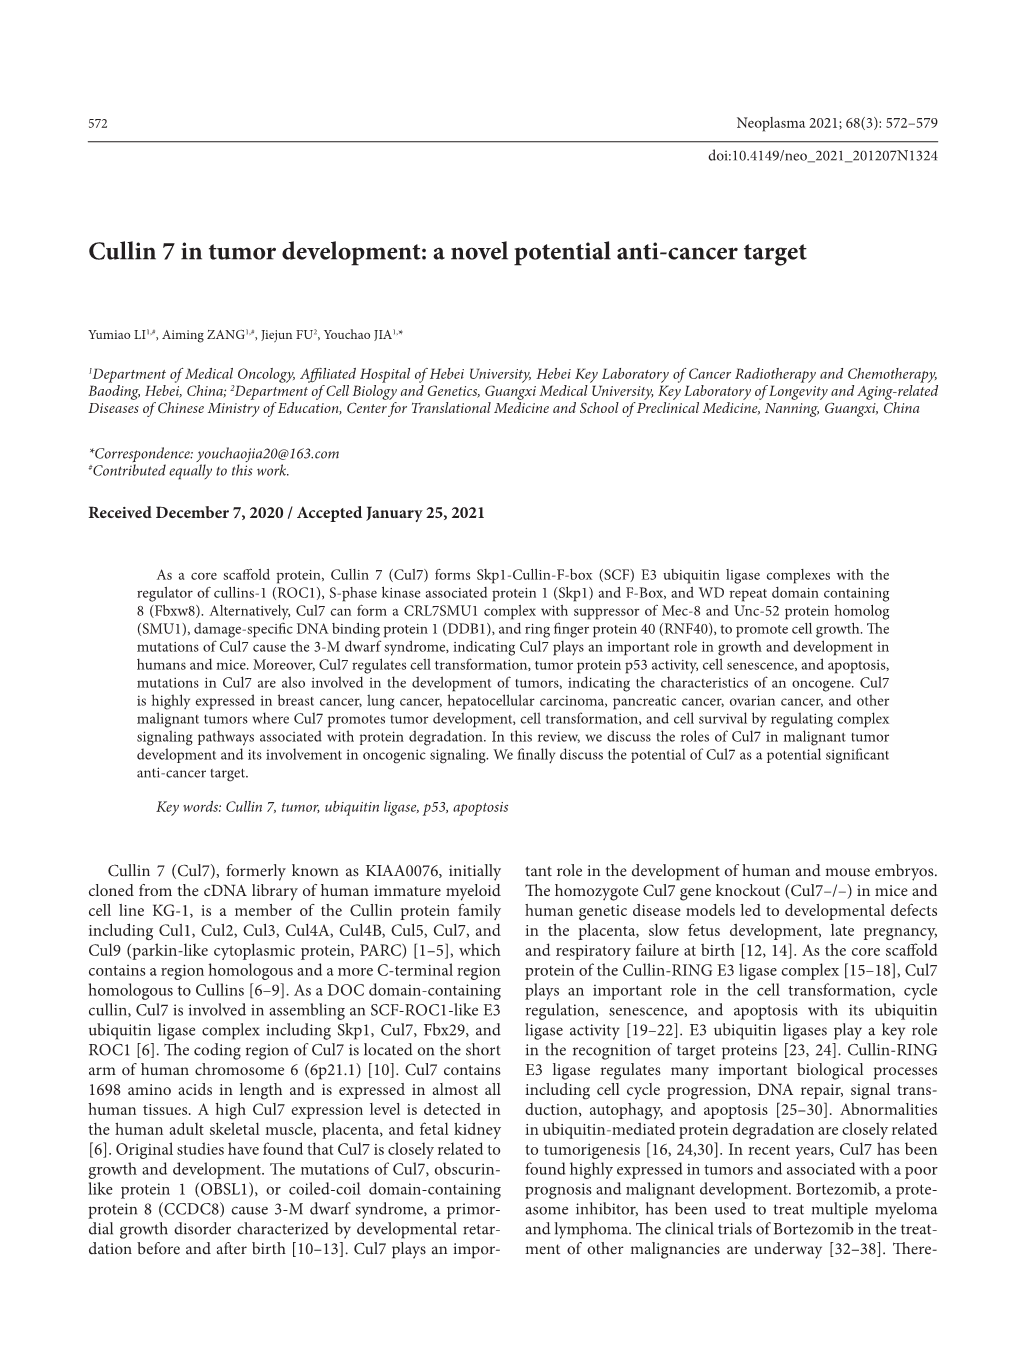 Cullin 7 in Tumor Development: a Novel Potential Anti-Cancer Target